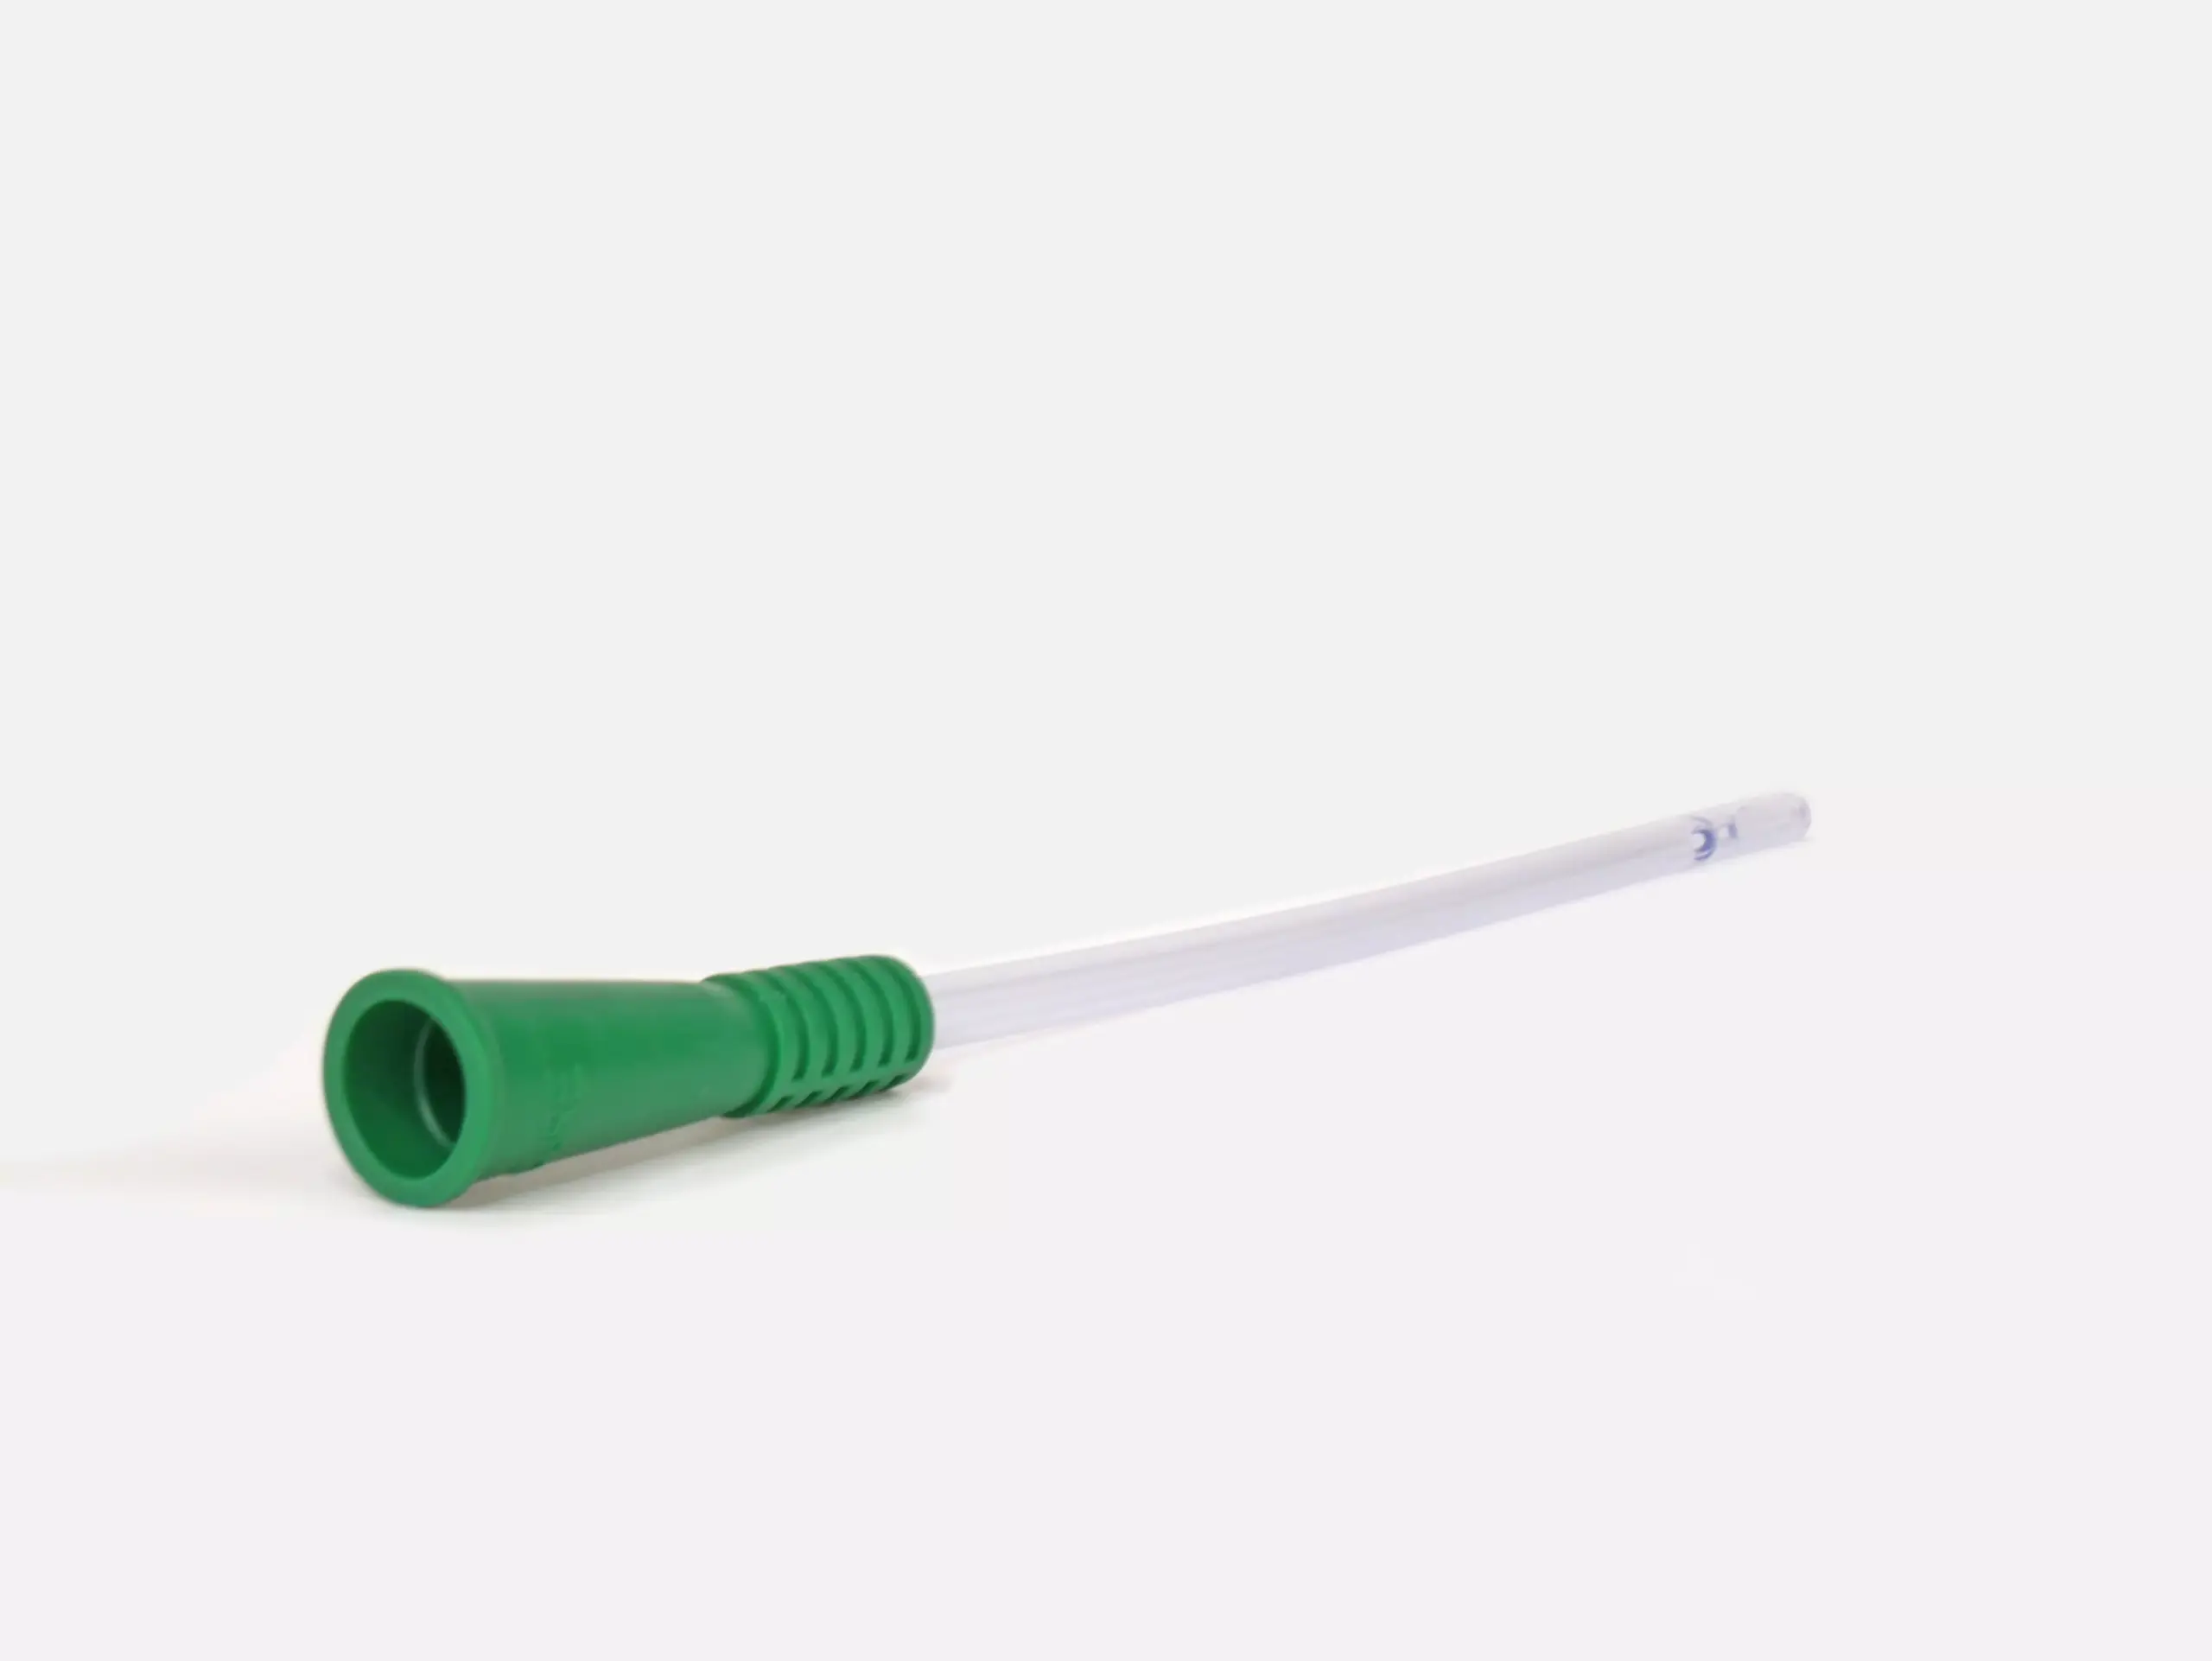 Close-up photograph product image of one of RA Fischer Co.'s catheters for urological care. It has a green gripper sleeve.